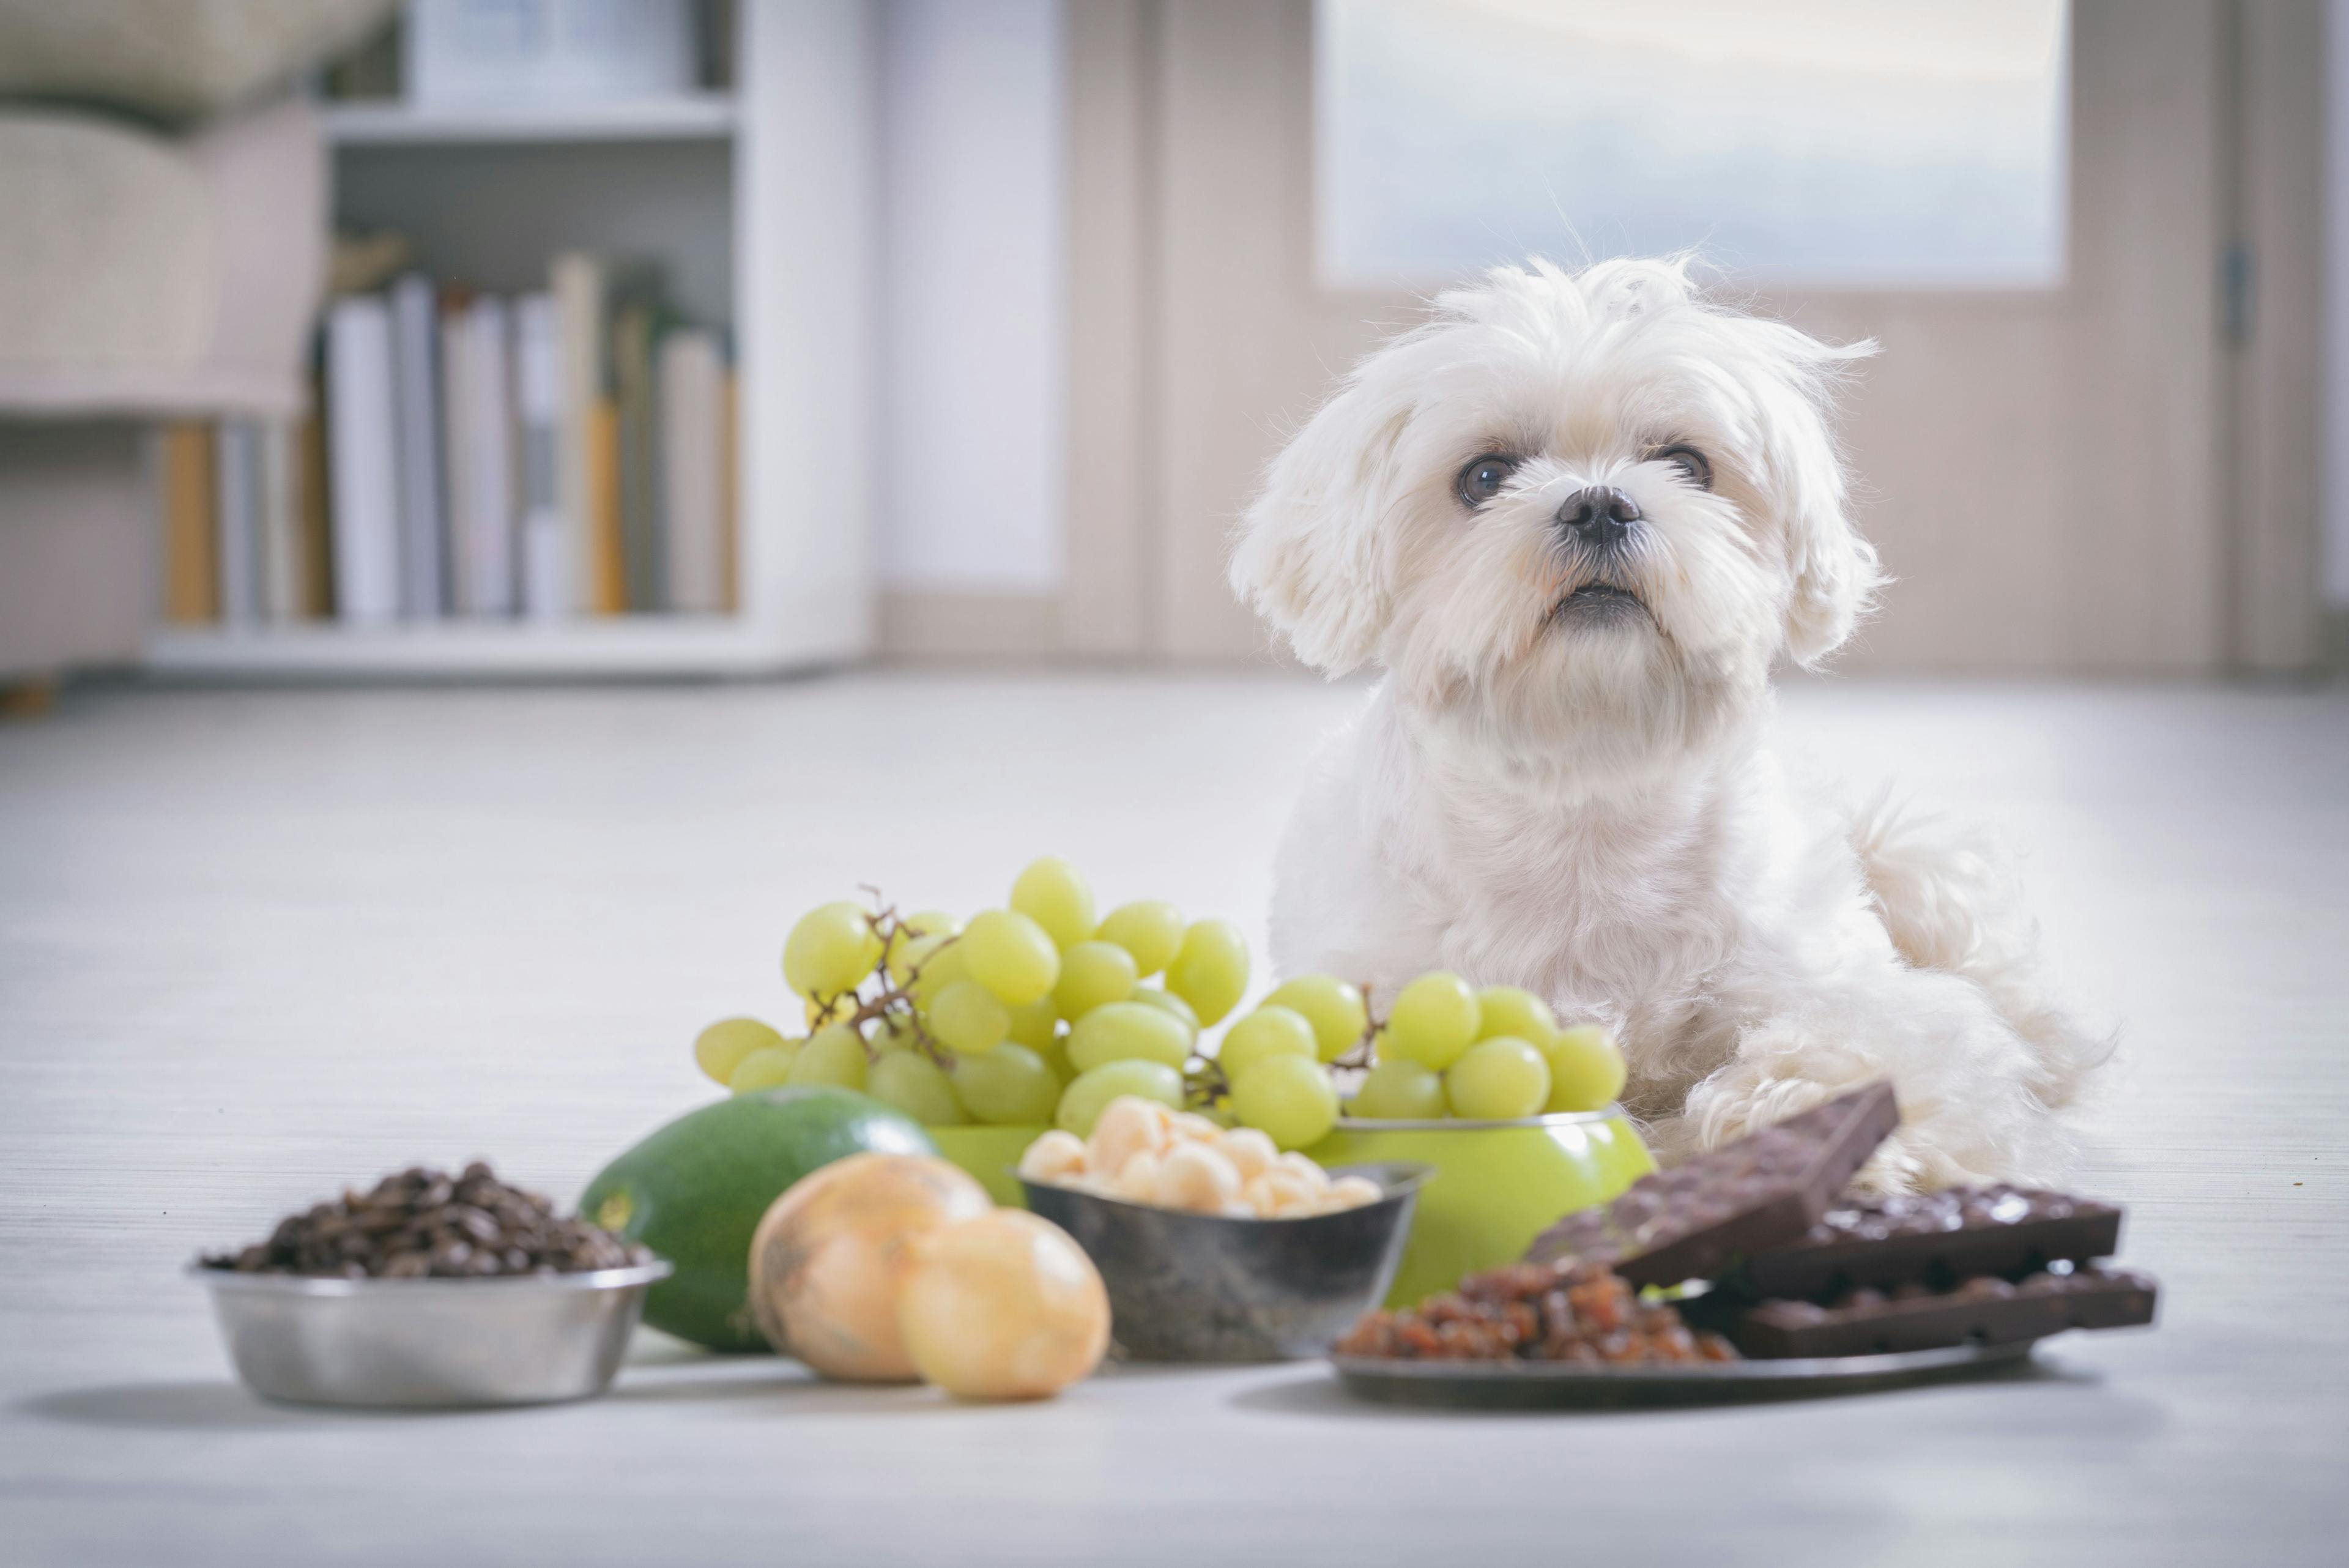 dog with food toxic to them